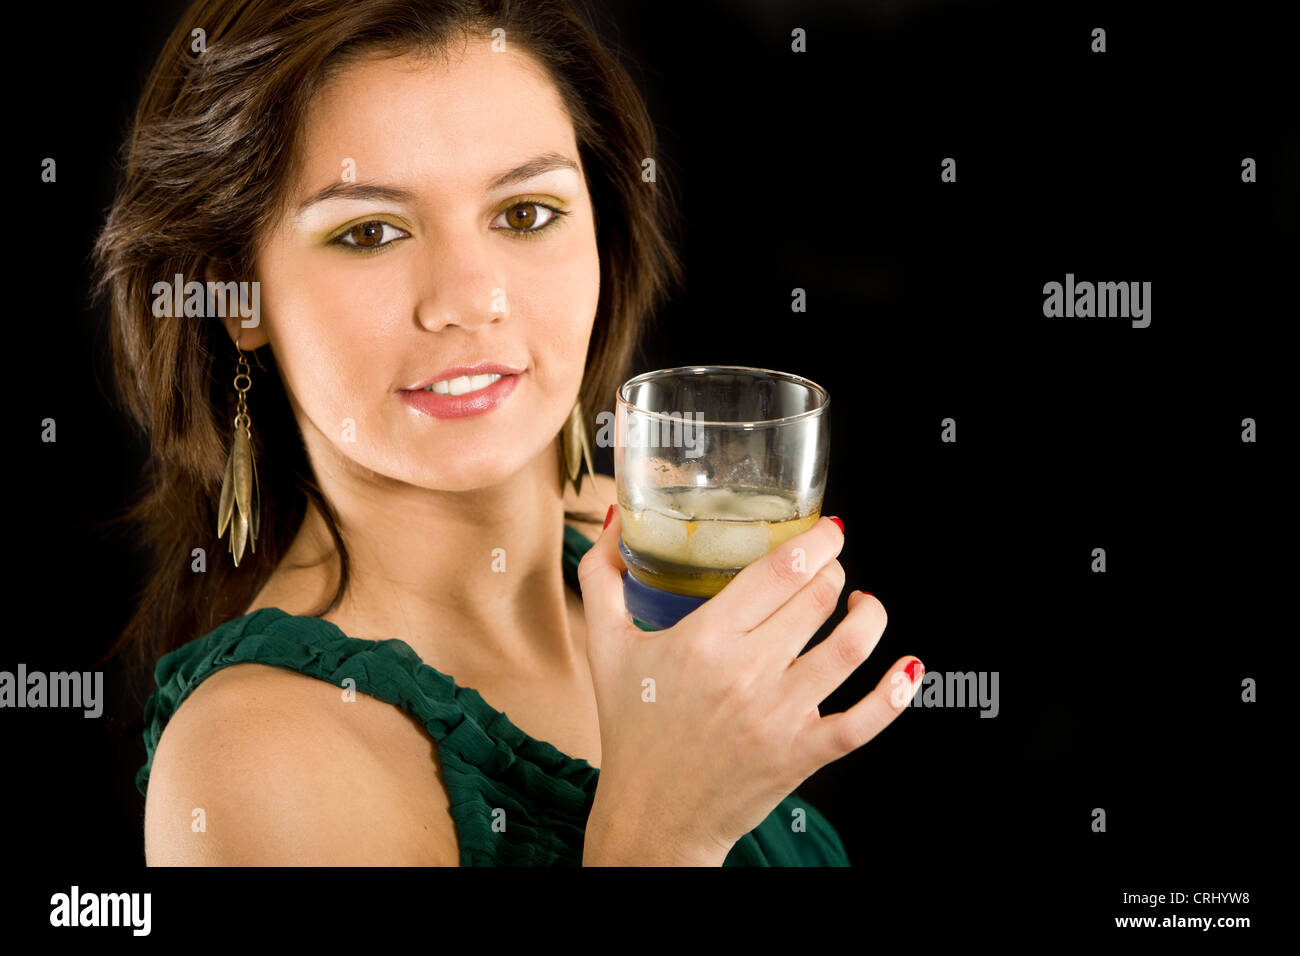 Beautiful elegant woman with a drink in her hand Stock Photo